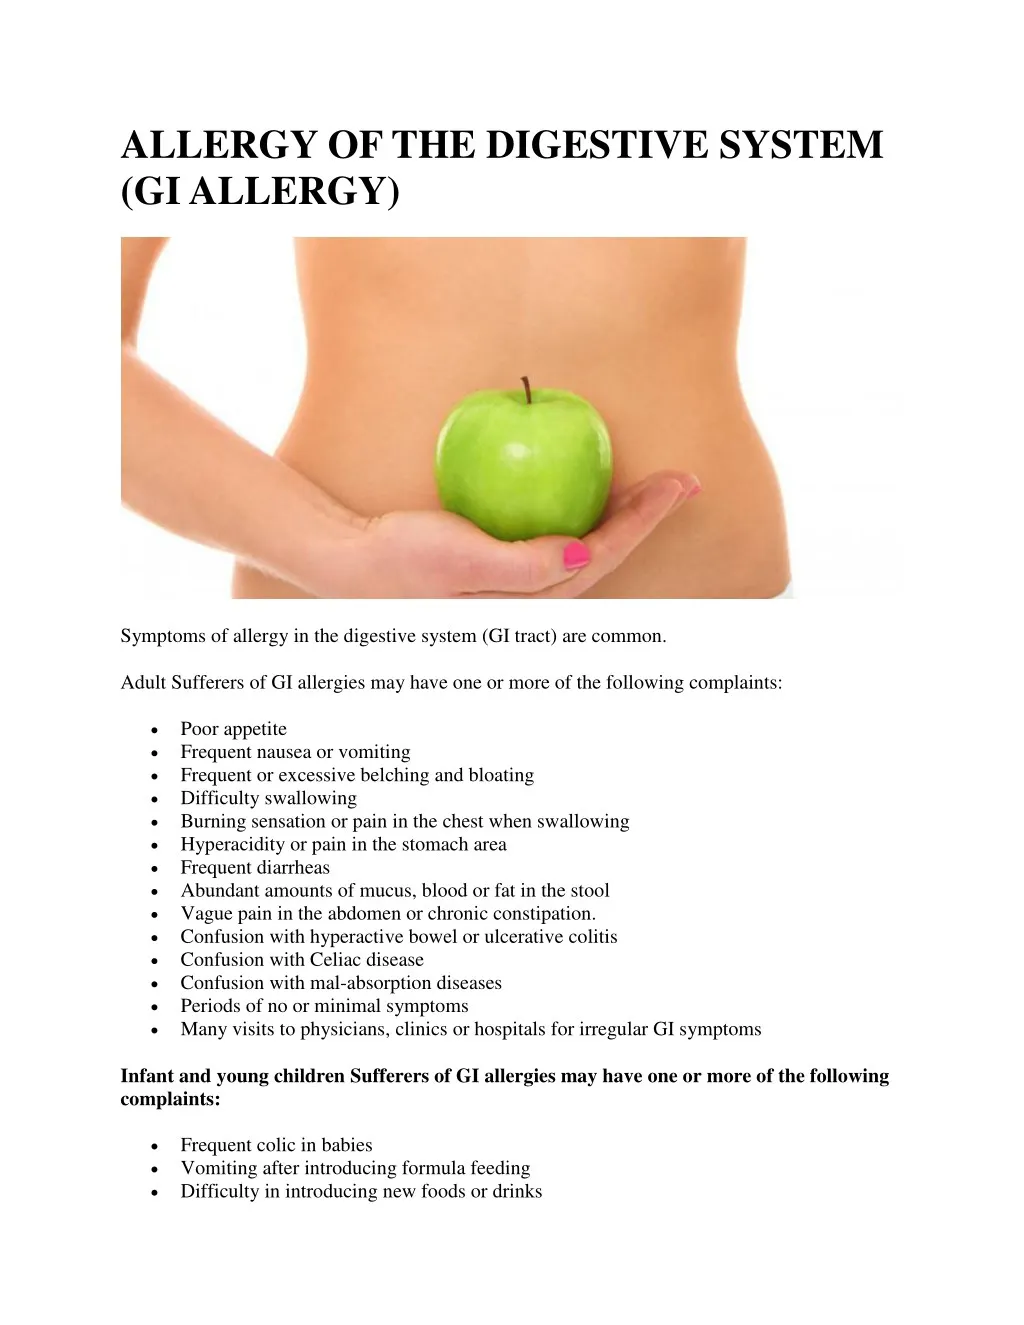 allergy of the digestive system gi allergy